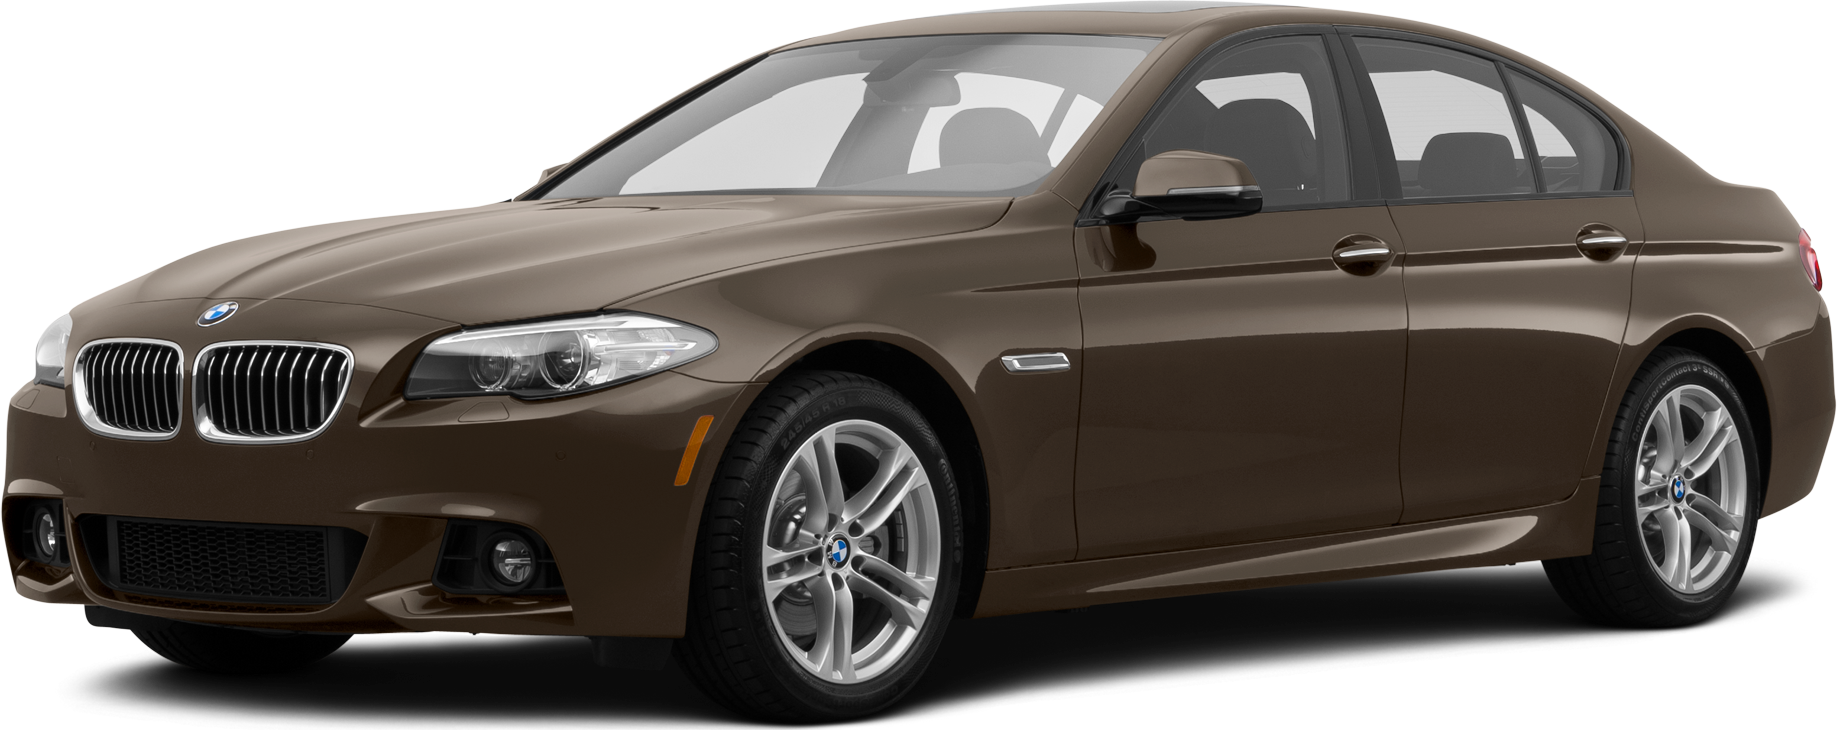 2014 BMW 5 Series Values & Cars for Sale | Kelley Blue Book